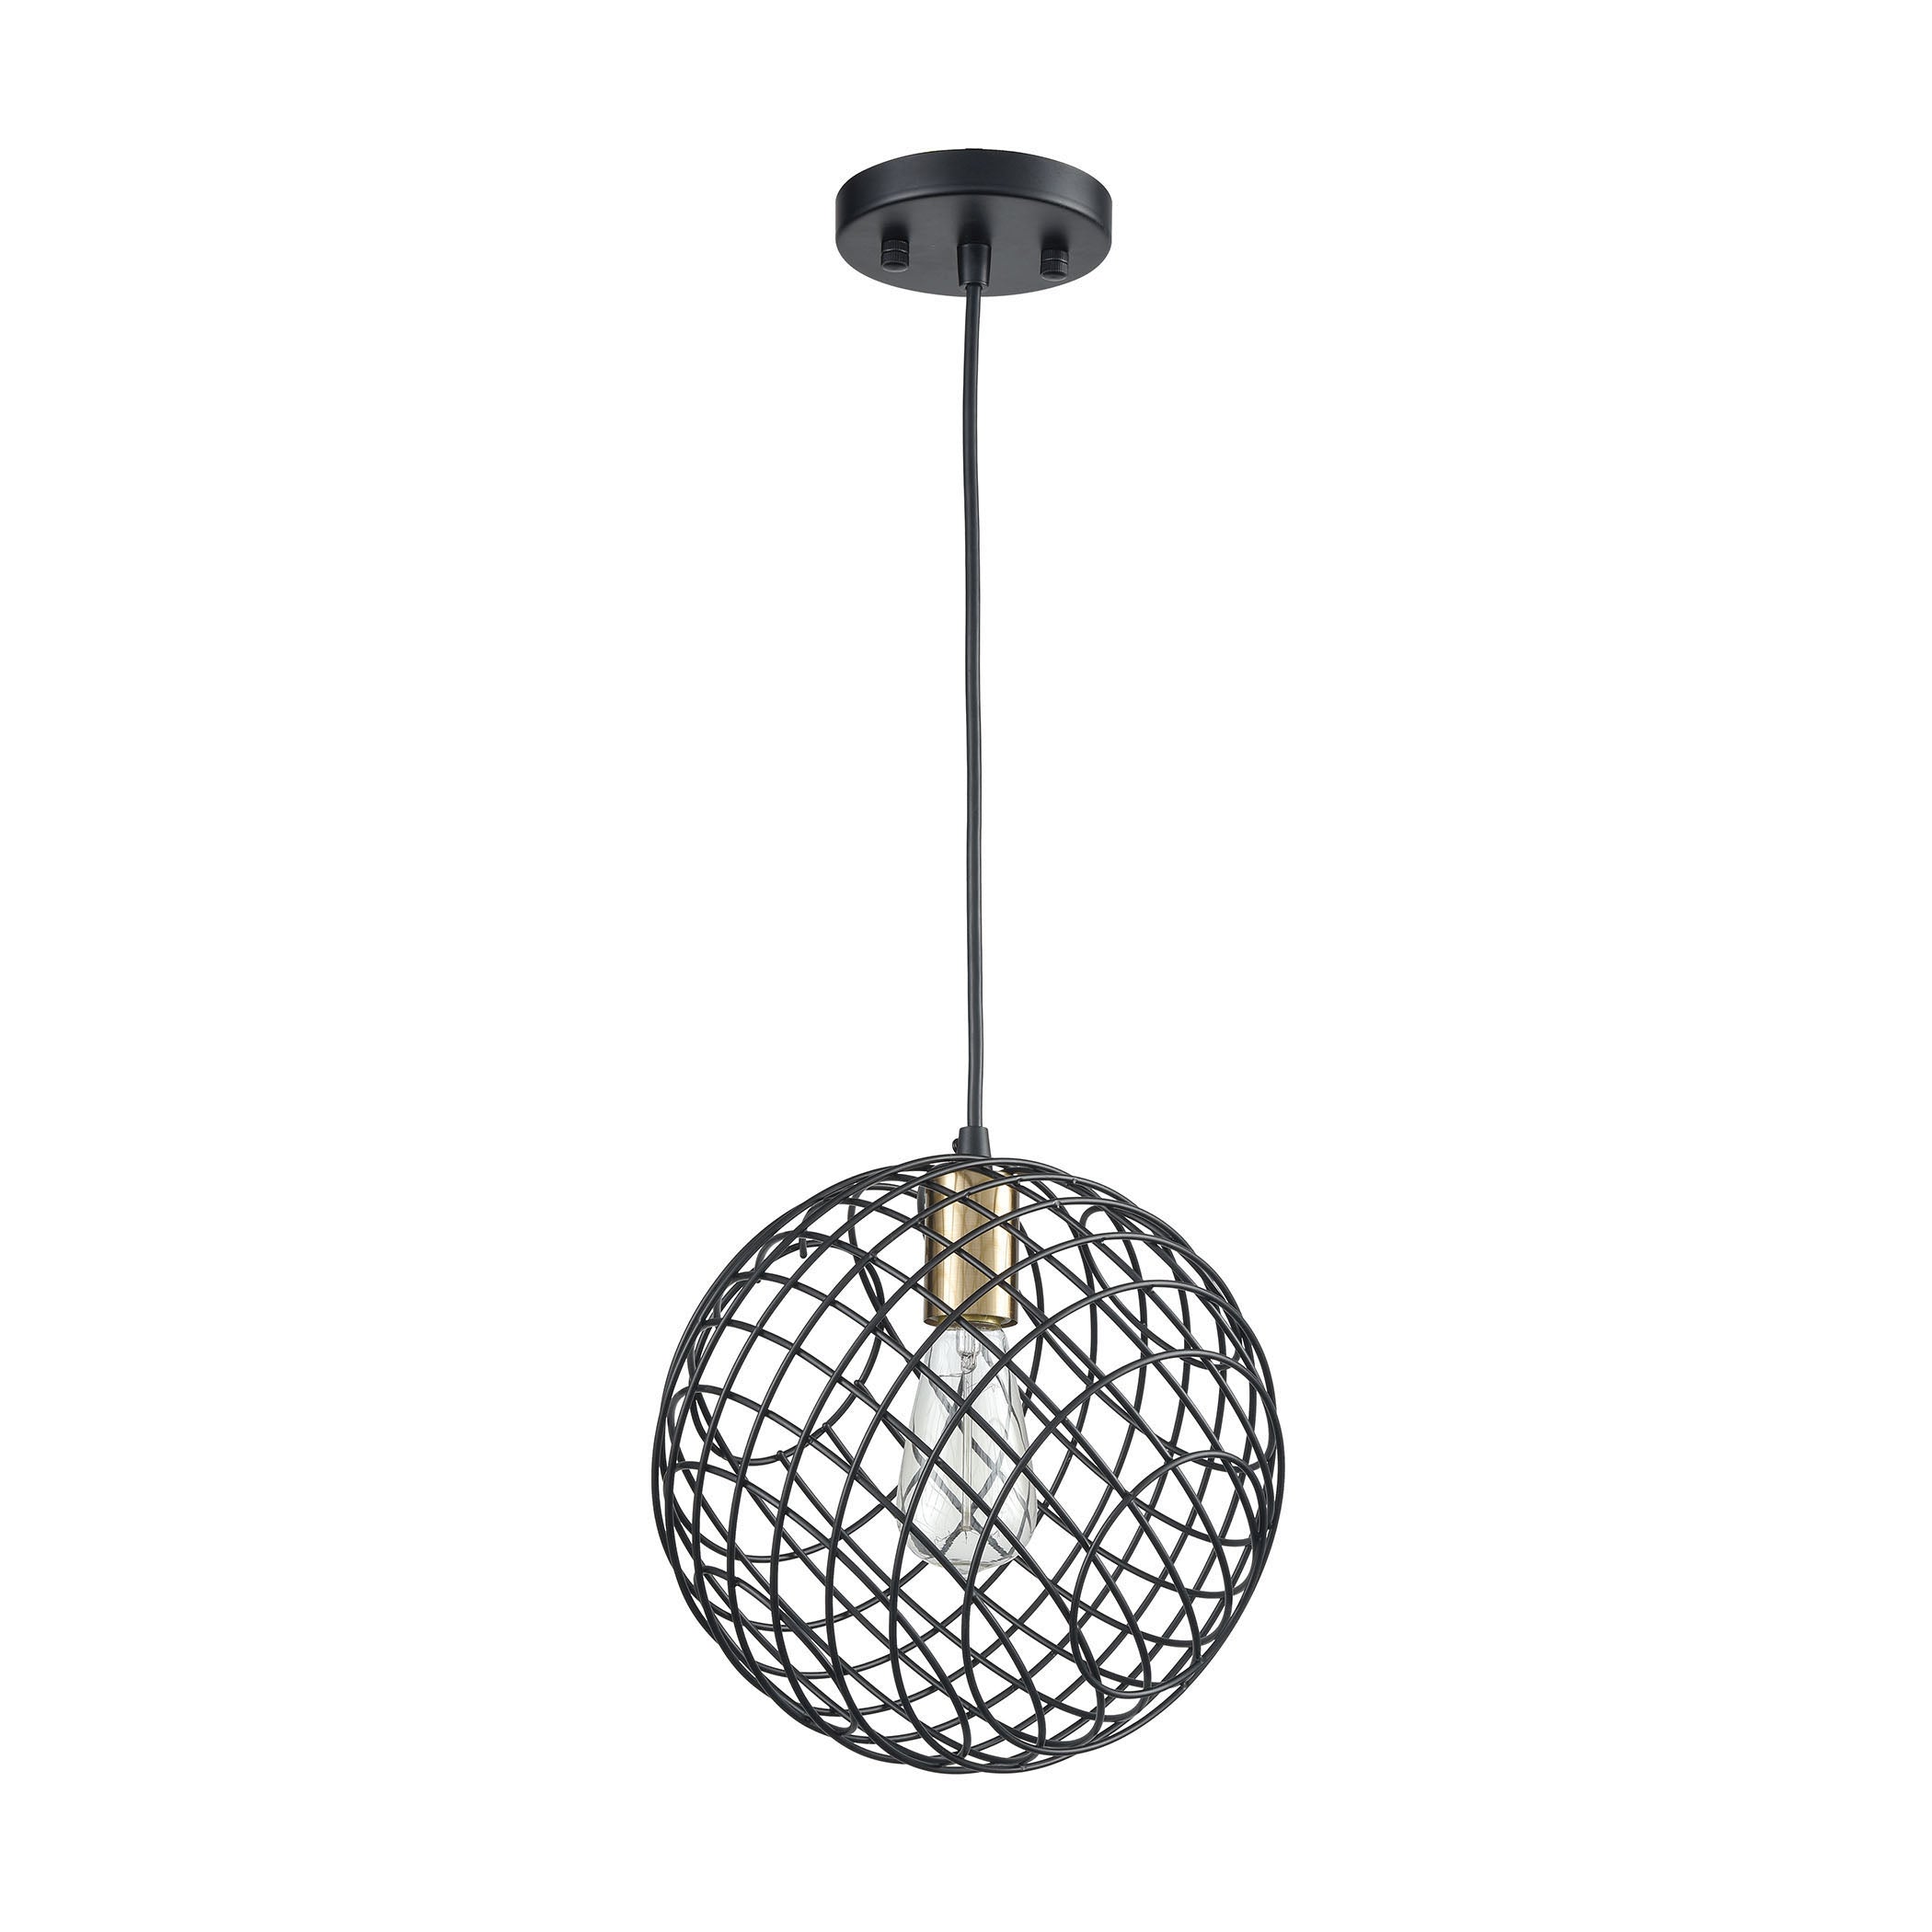 ELK Lighting 15293/1 Yardley 1-Light Mini Pendant in Matte Black and Satin Brass with Wire Cage